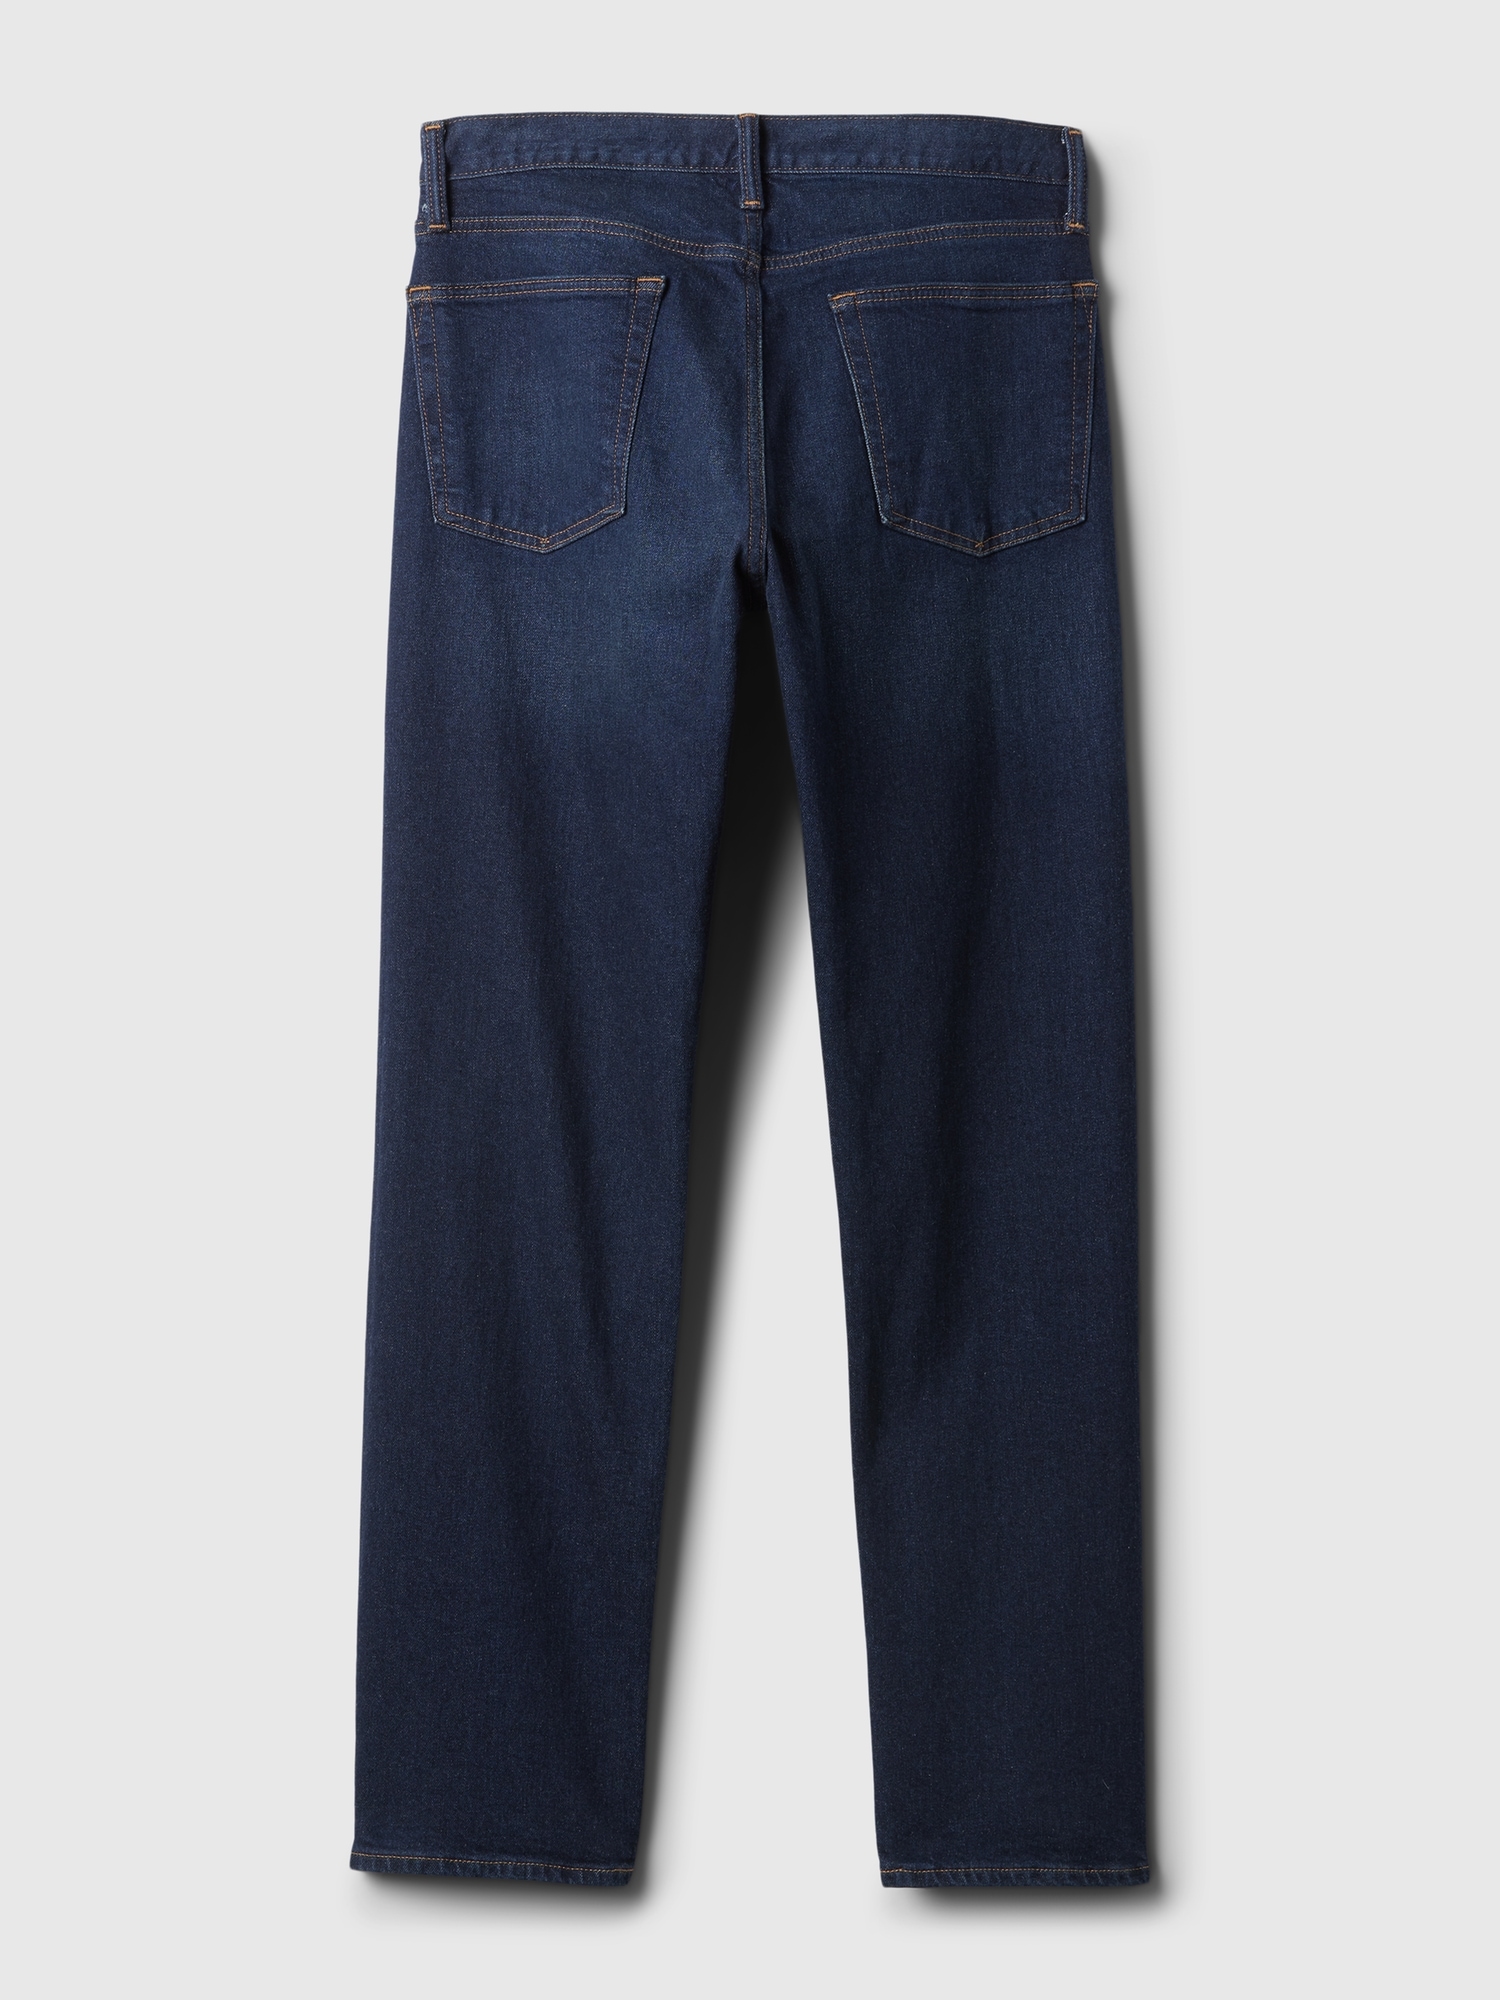 SF Jeans Men Ribbed Waist Denim Blue Joggers - Selling Fast at